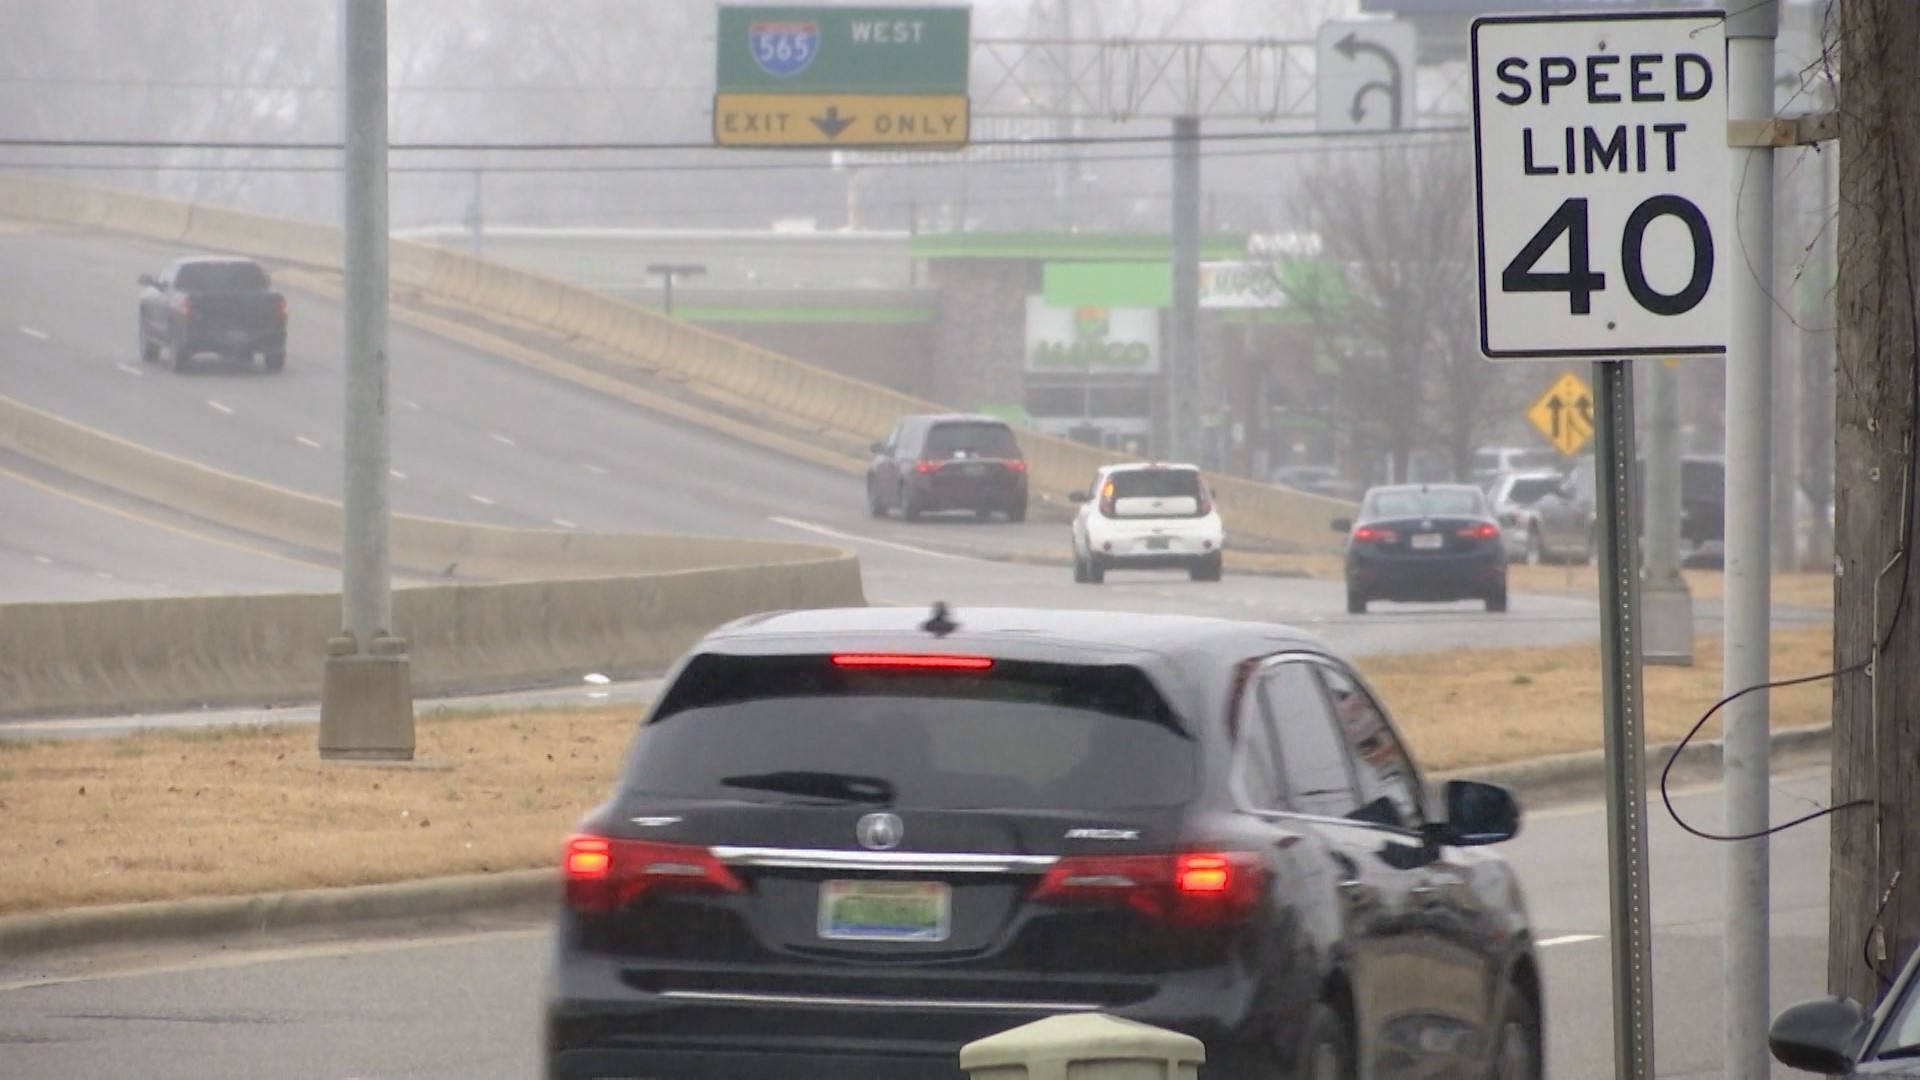 More people on the road means more risk for accidents. Here's how you can drive safely.